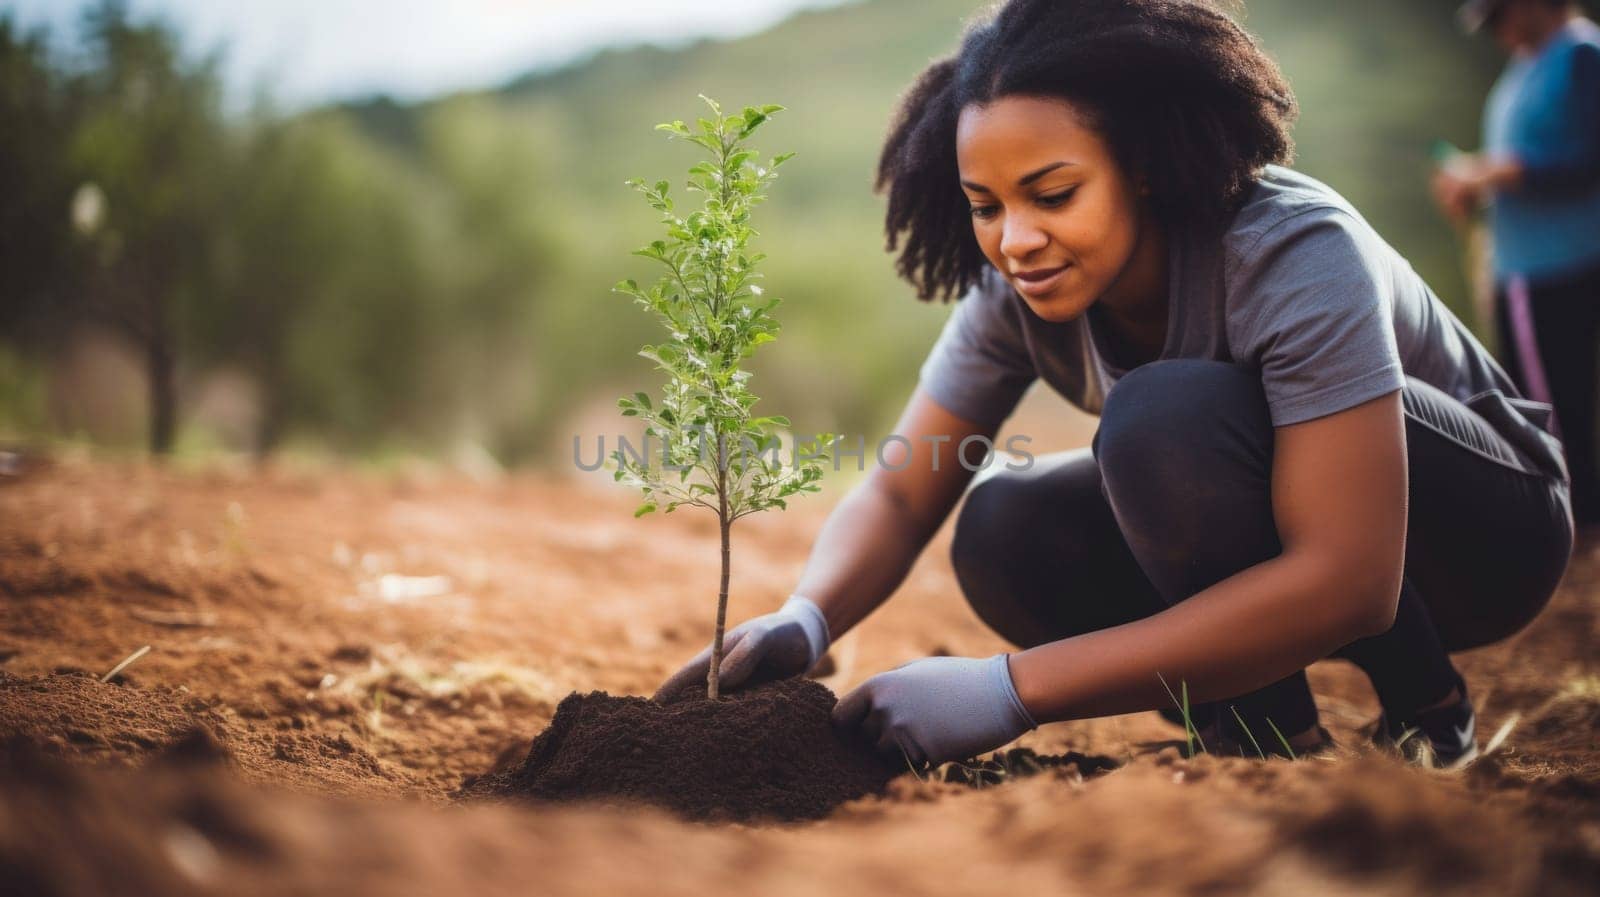 Happy afro american girl planting a tree. Earth protection and sustainability concept by papatonic